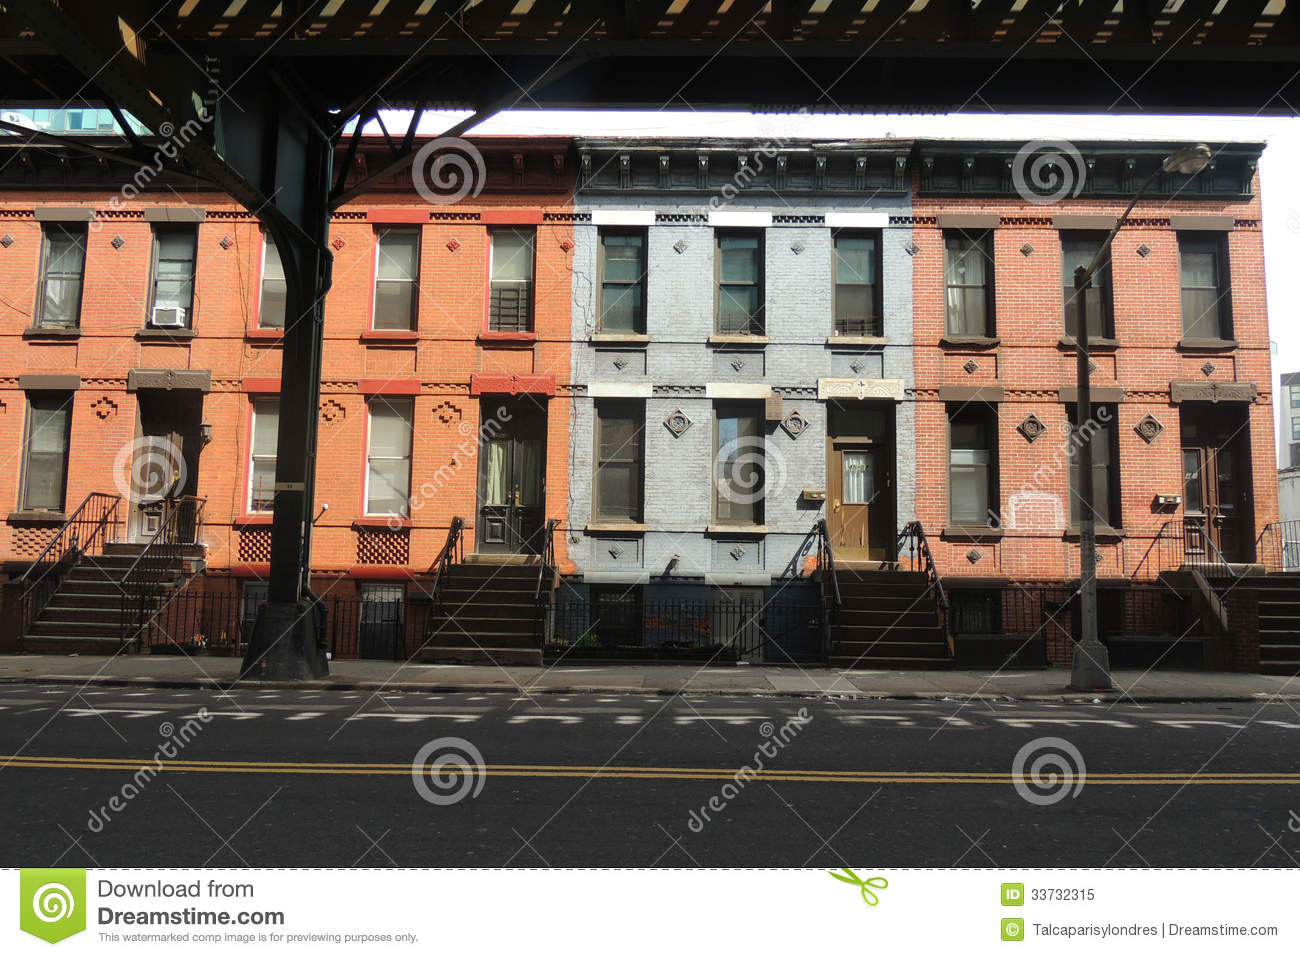 Colorful Row Houses In Queens New York Under The Subway Tracks